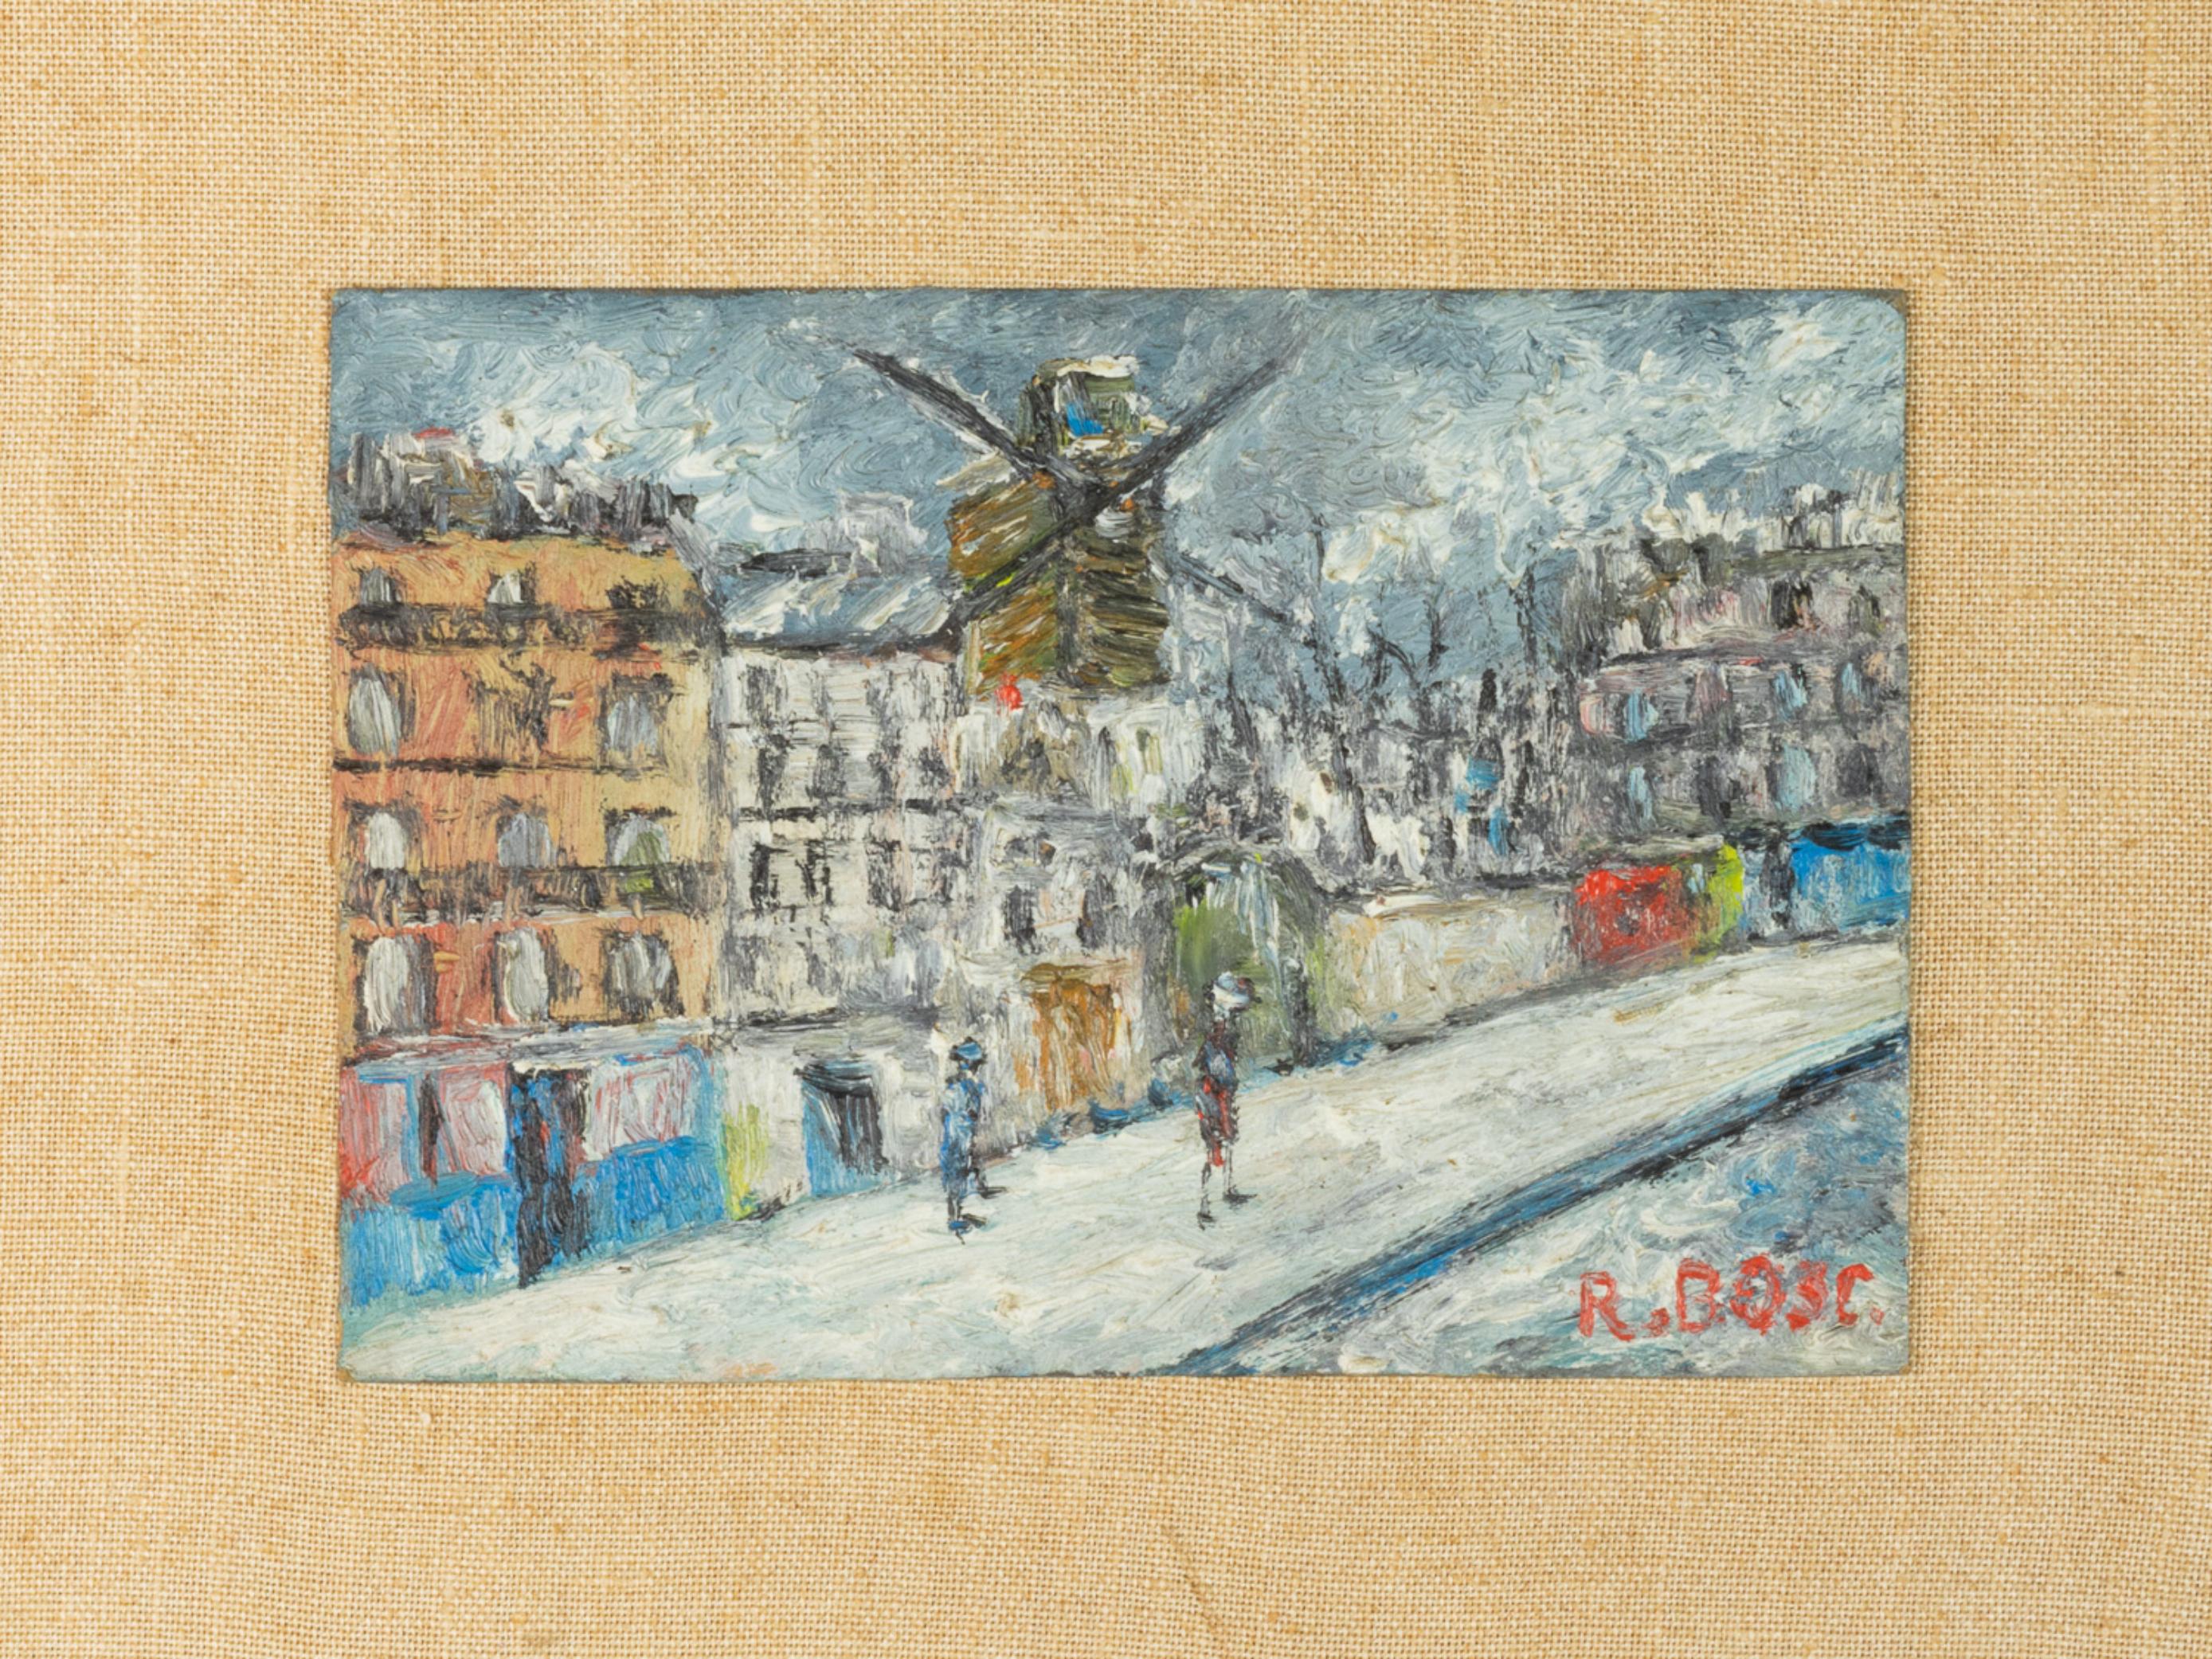 An early french post-impressionism 20th century oil painting of the Sacre Coeur and the Moulin Rouge signed “R . Bosc” on  Oil on composite wood panel and beautifully framed.  It is part of an interesting group of melancholic views of the old city